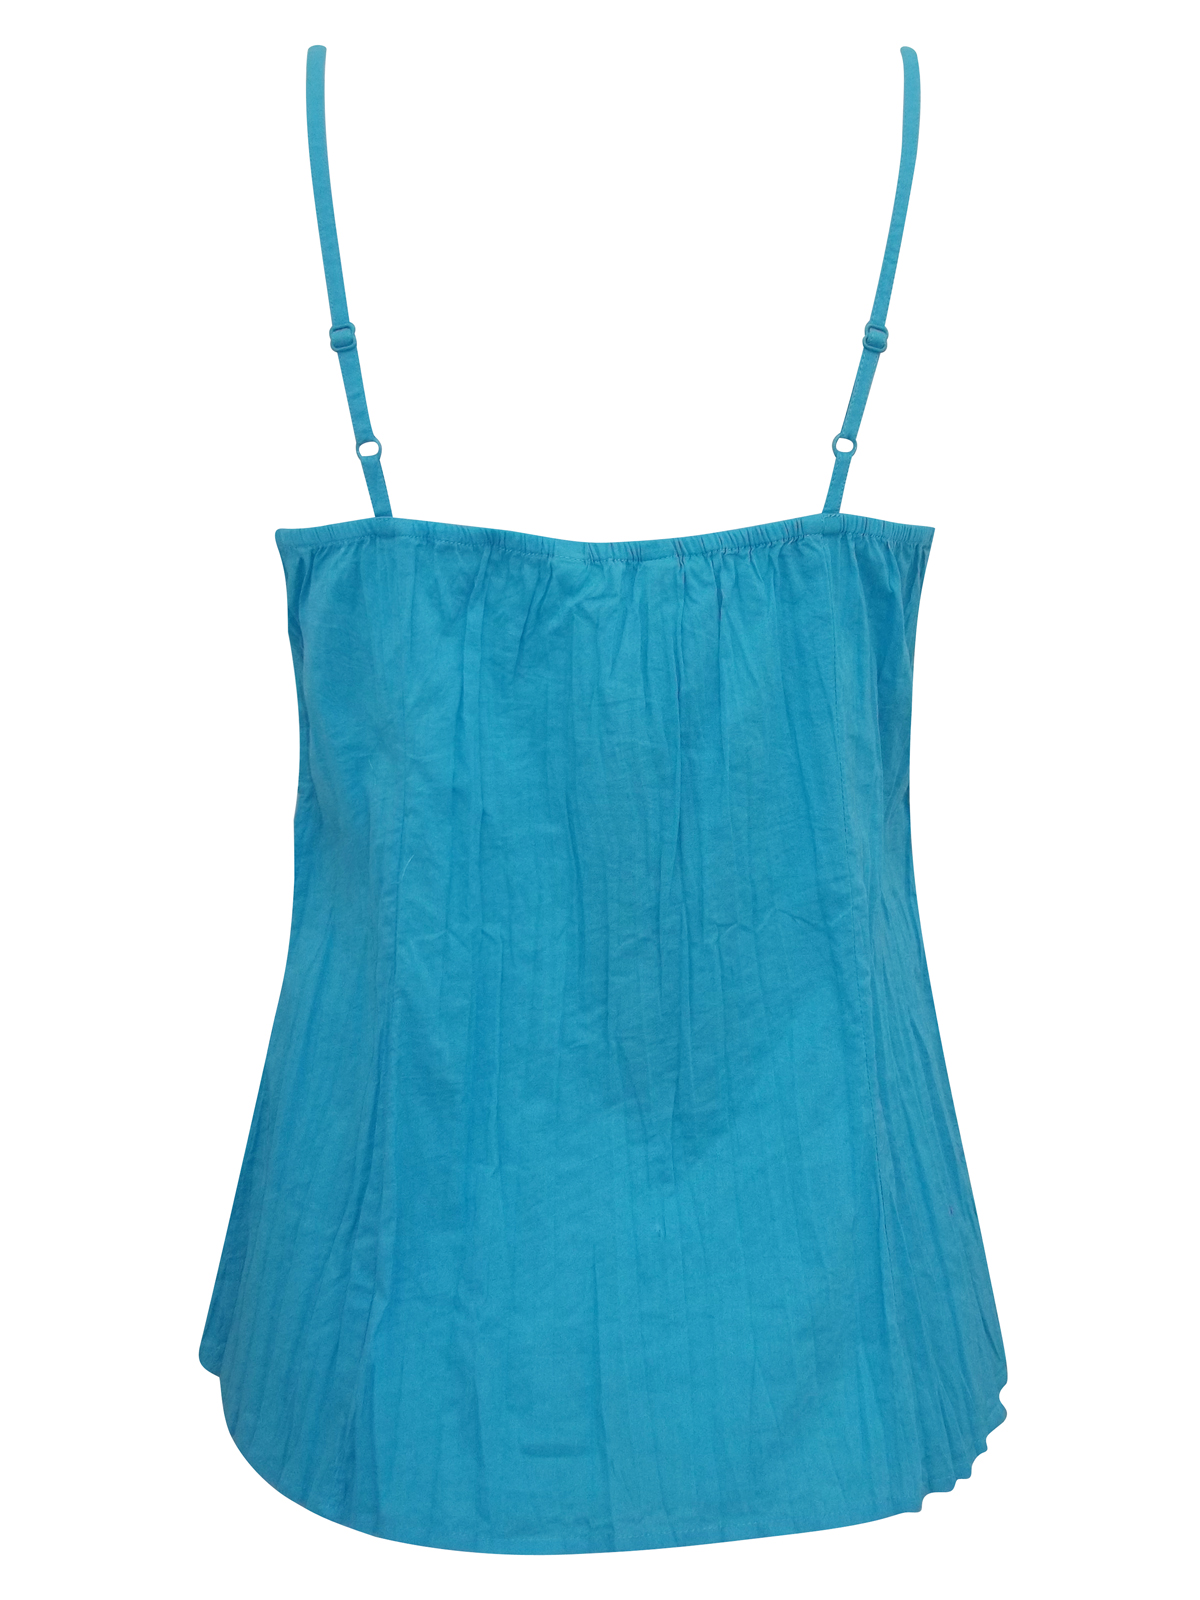 Marks and Spencer - - M&5 Turquoise Crinkle Cotton Lace Trimmed ...